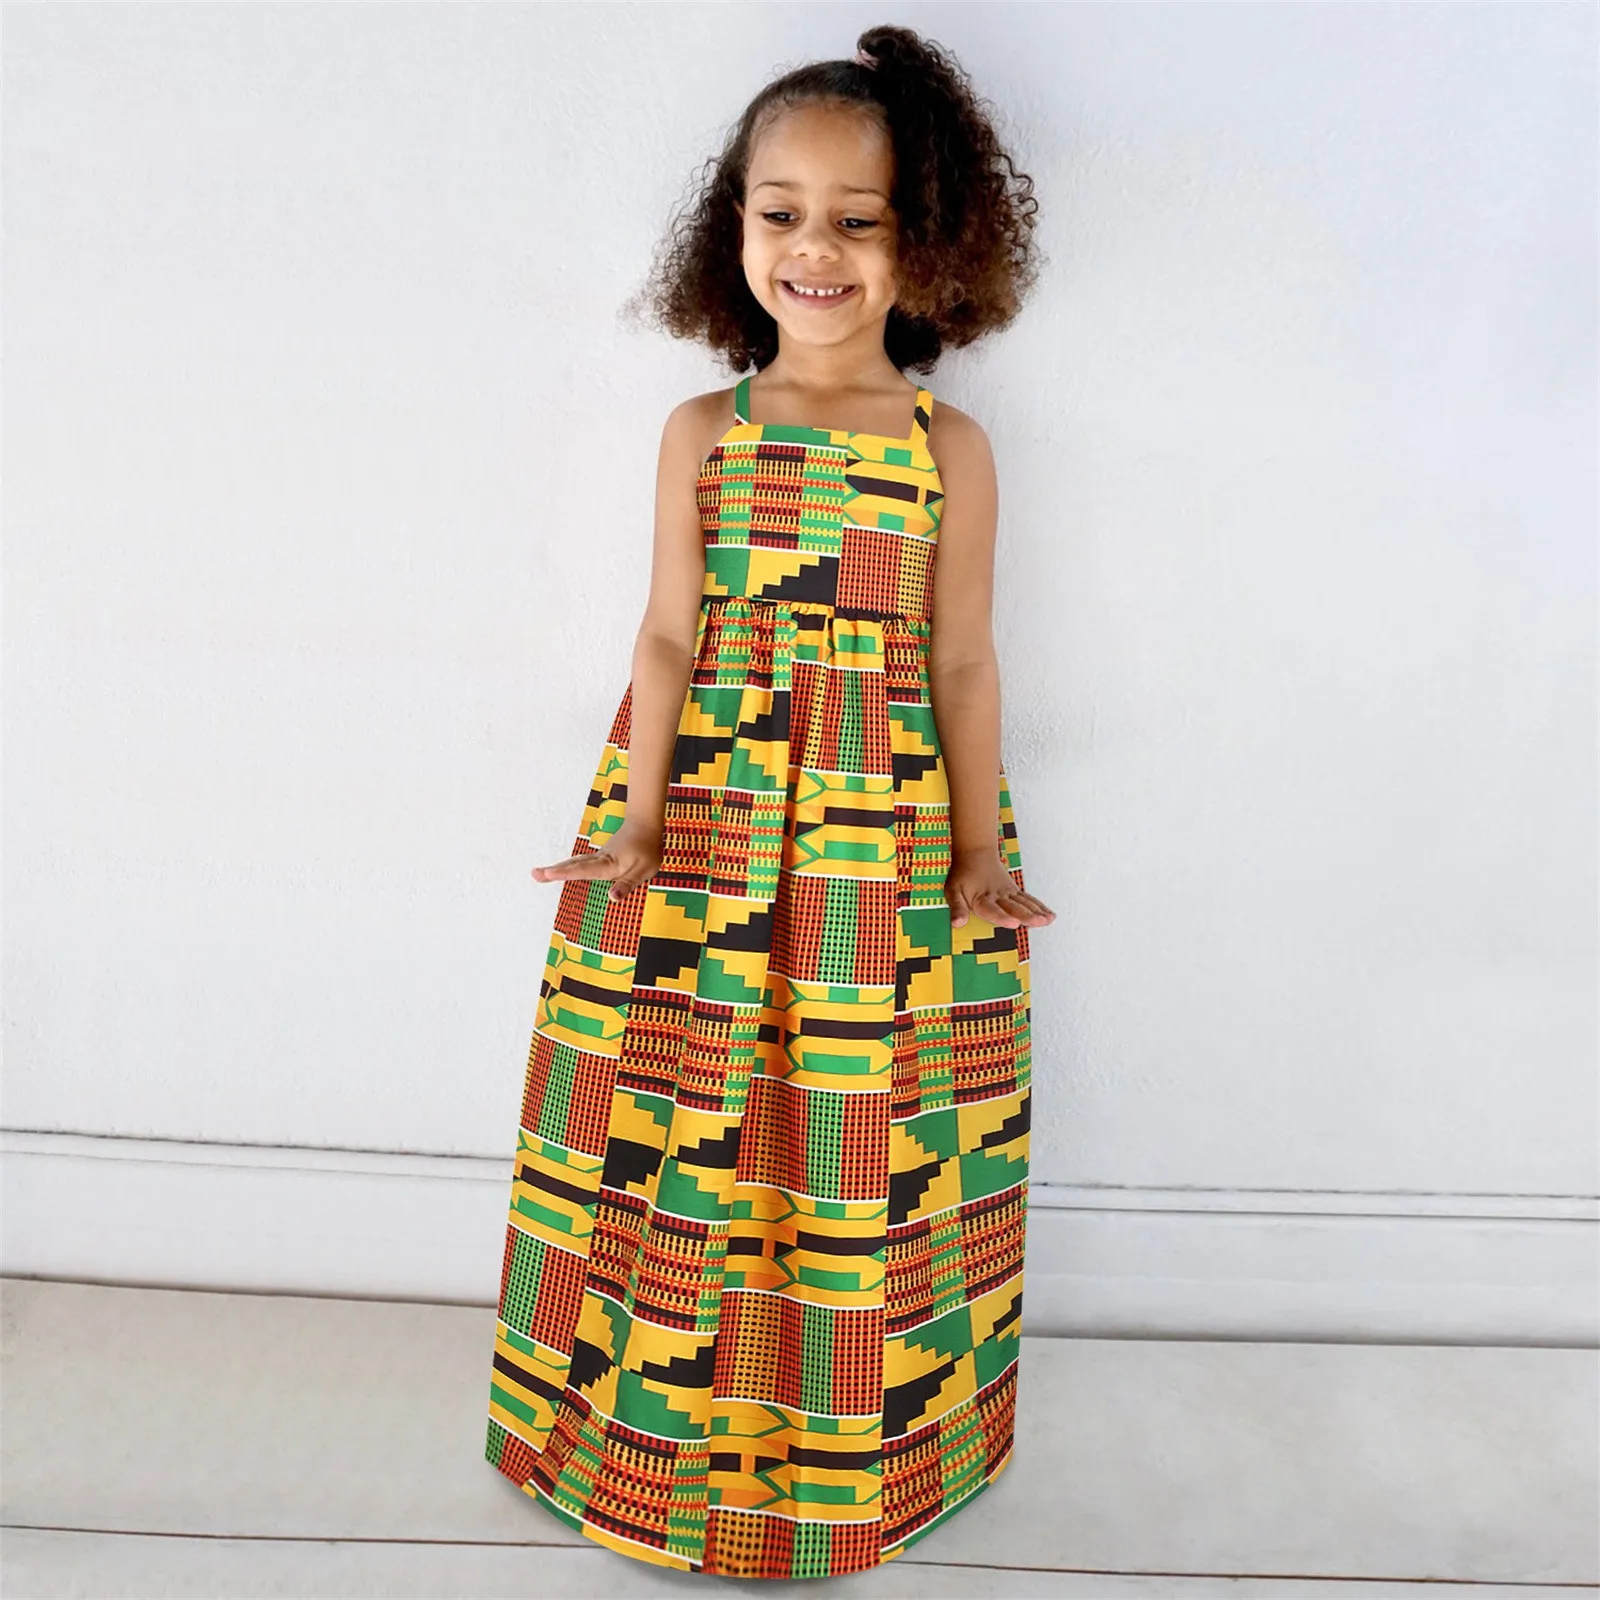 

Toddler Kids Baby Girls Casual Dress African Dashiki Traditional Style Sleeveless Strap Dress Backless Ankara Dress Outfits 1-6Y